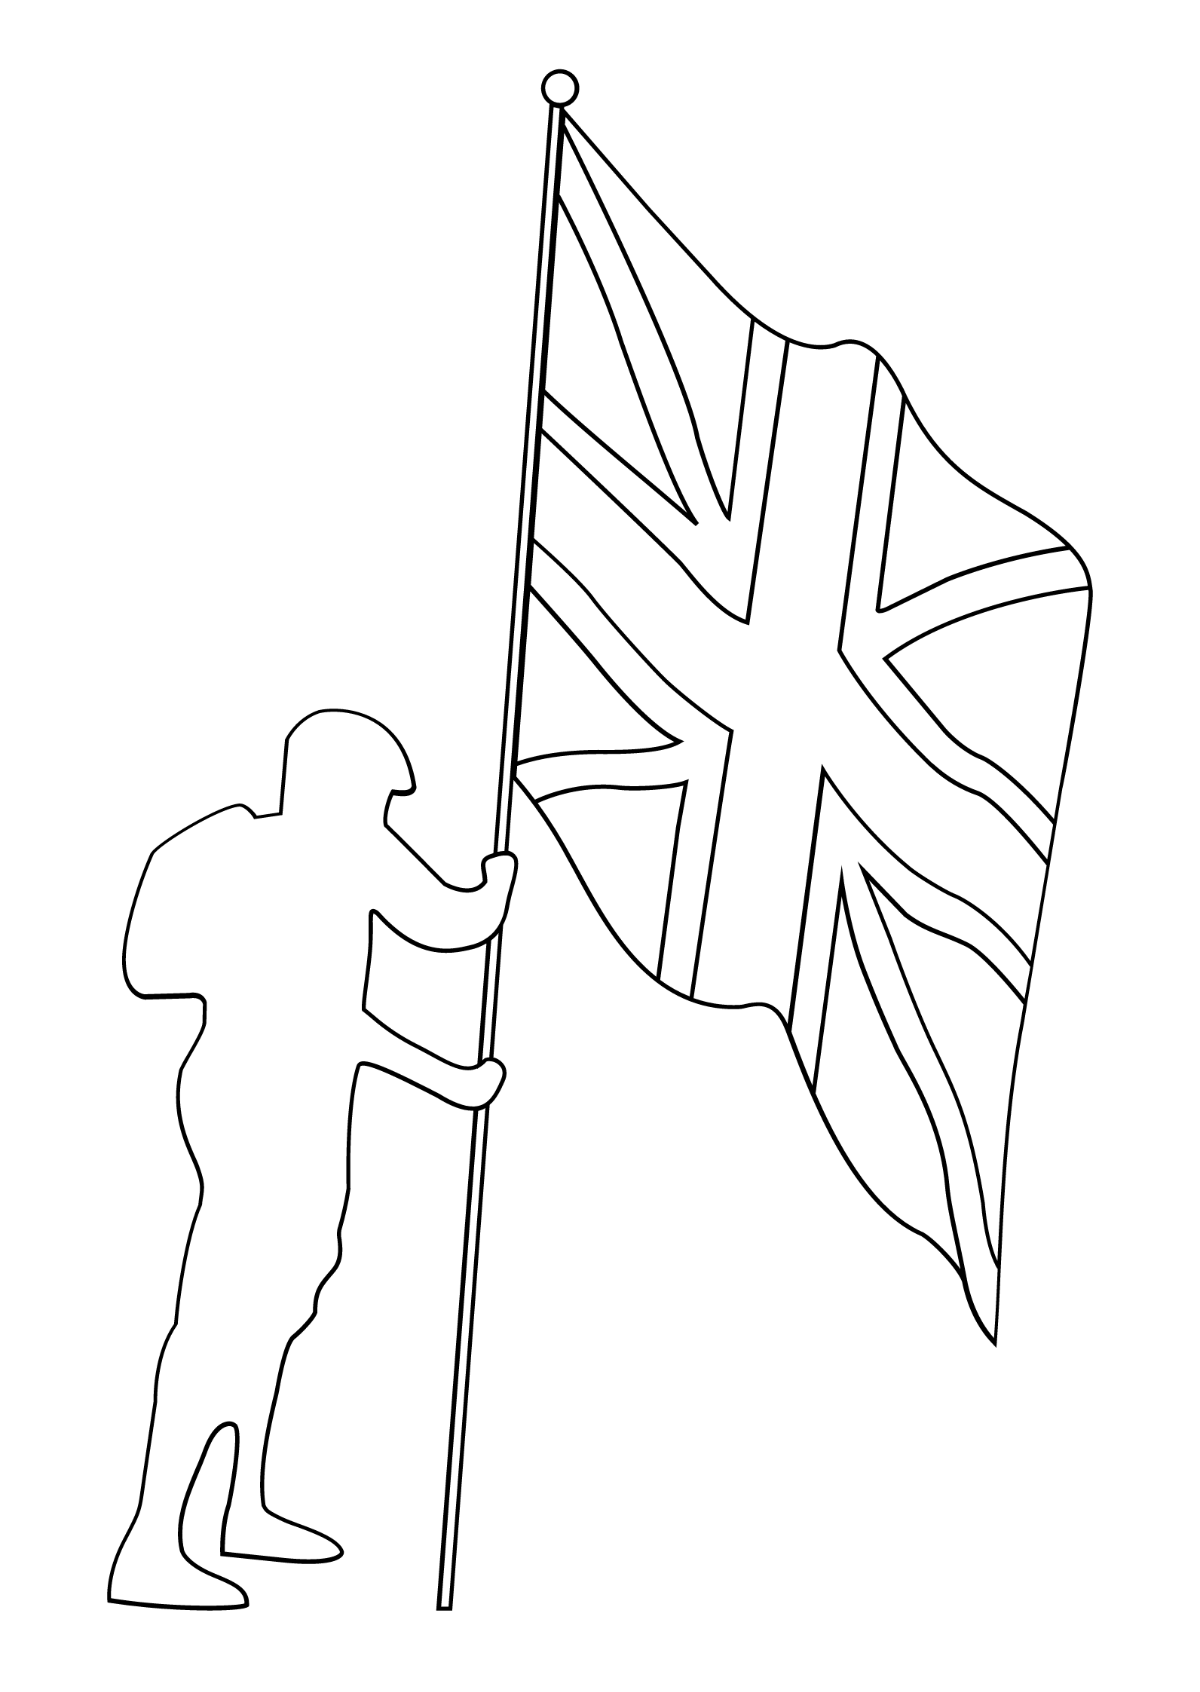 V-E Day Drawing Template